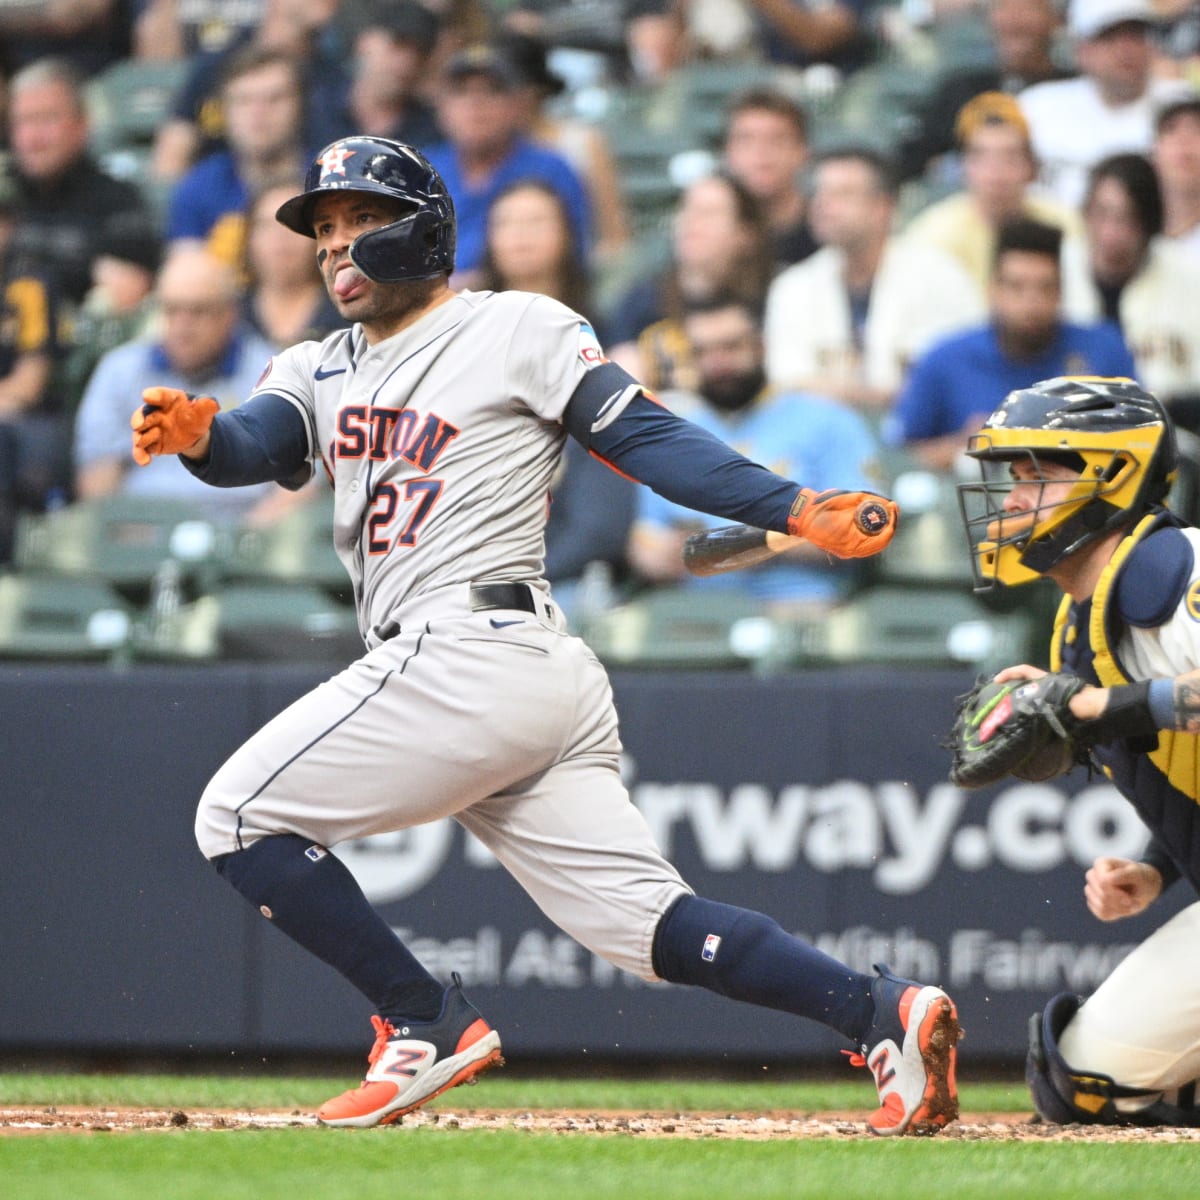 Houston Astros: Jose Altuve injury update after hit by pitch